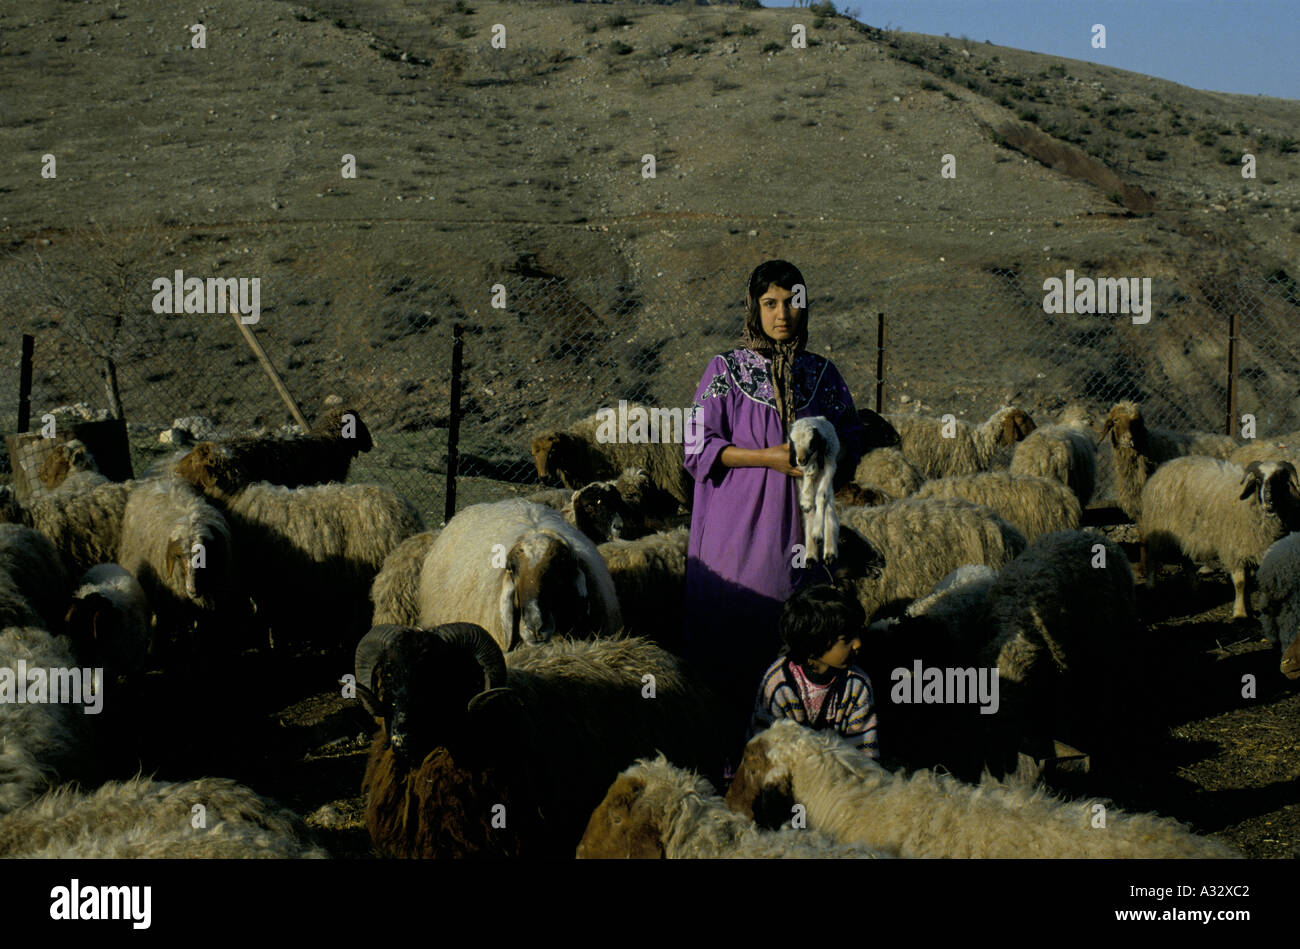 kurdistan feb 1993 a young woman holding a lamb while a young child tends sheep Stock Photo